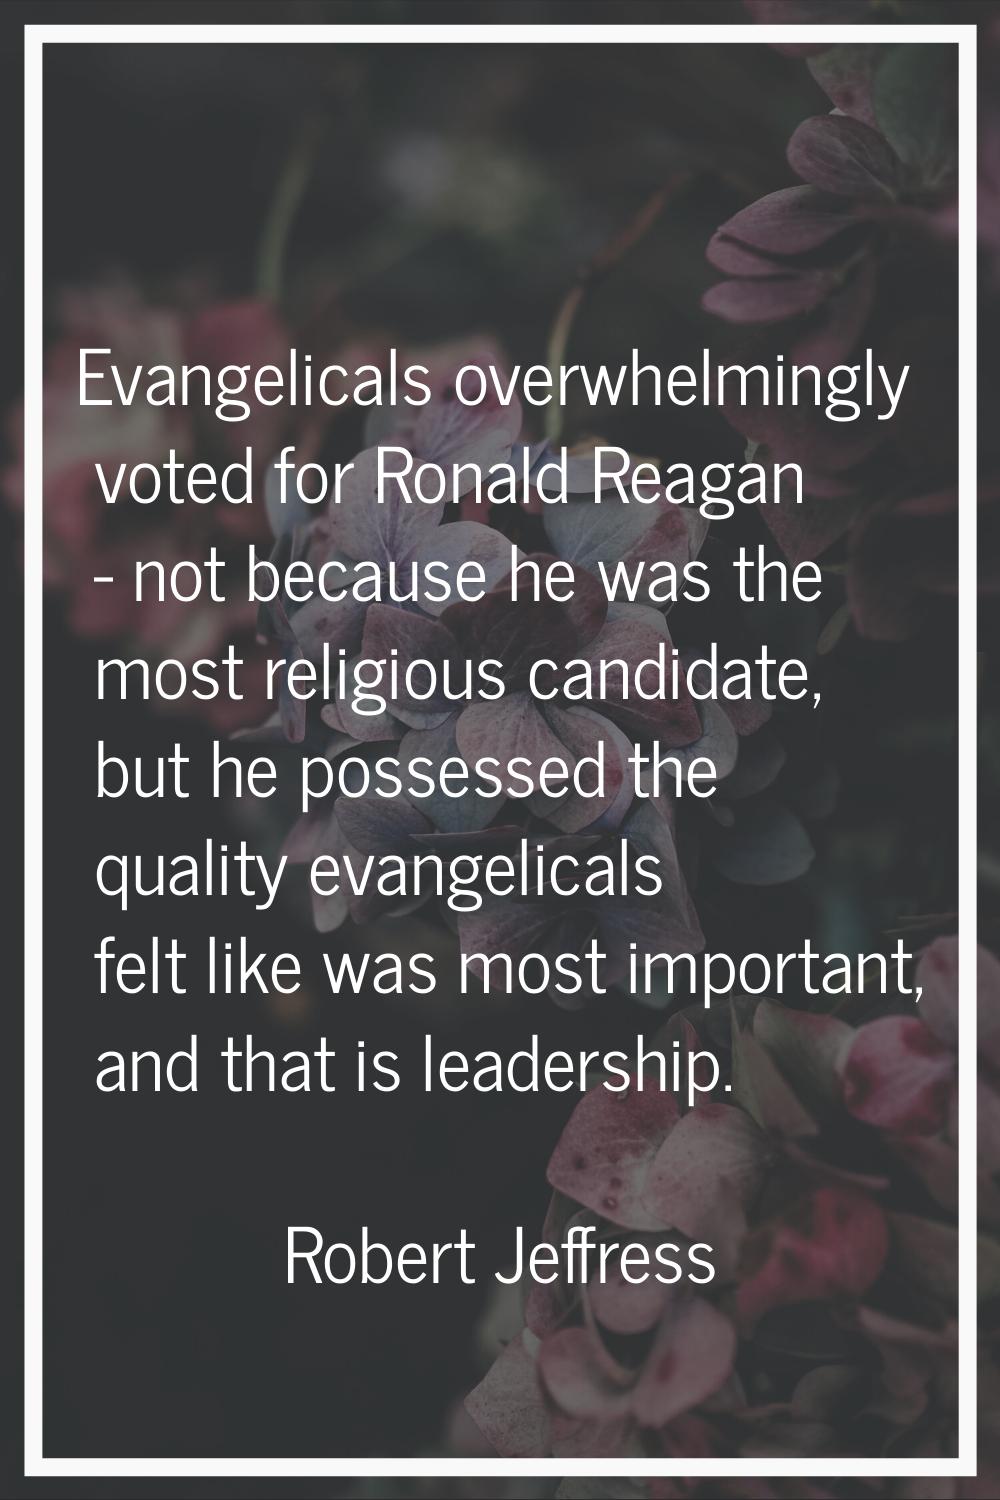 Evangelicals overwhelmingly voted for Ronald Reagan - not because he was the most religious candida